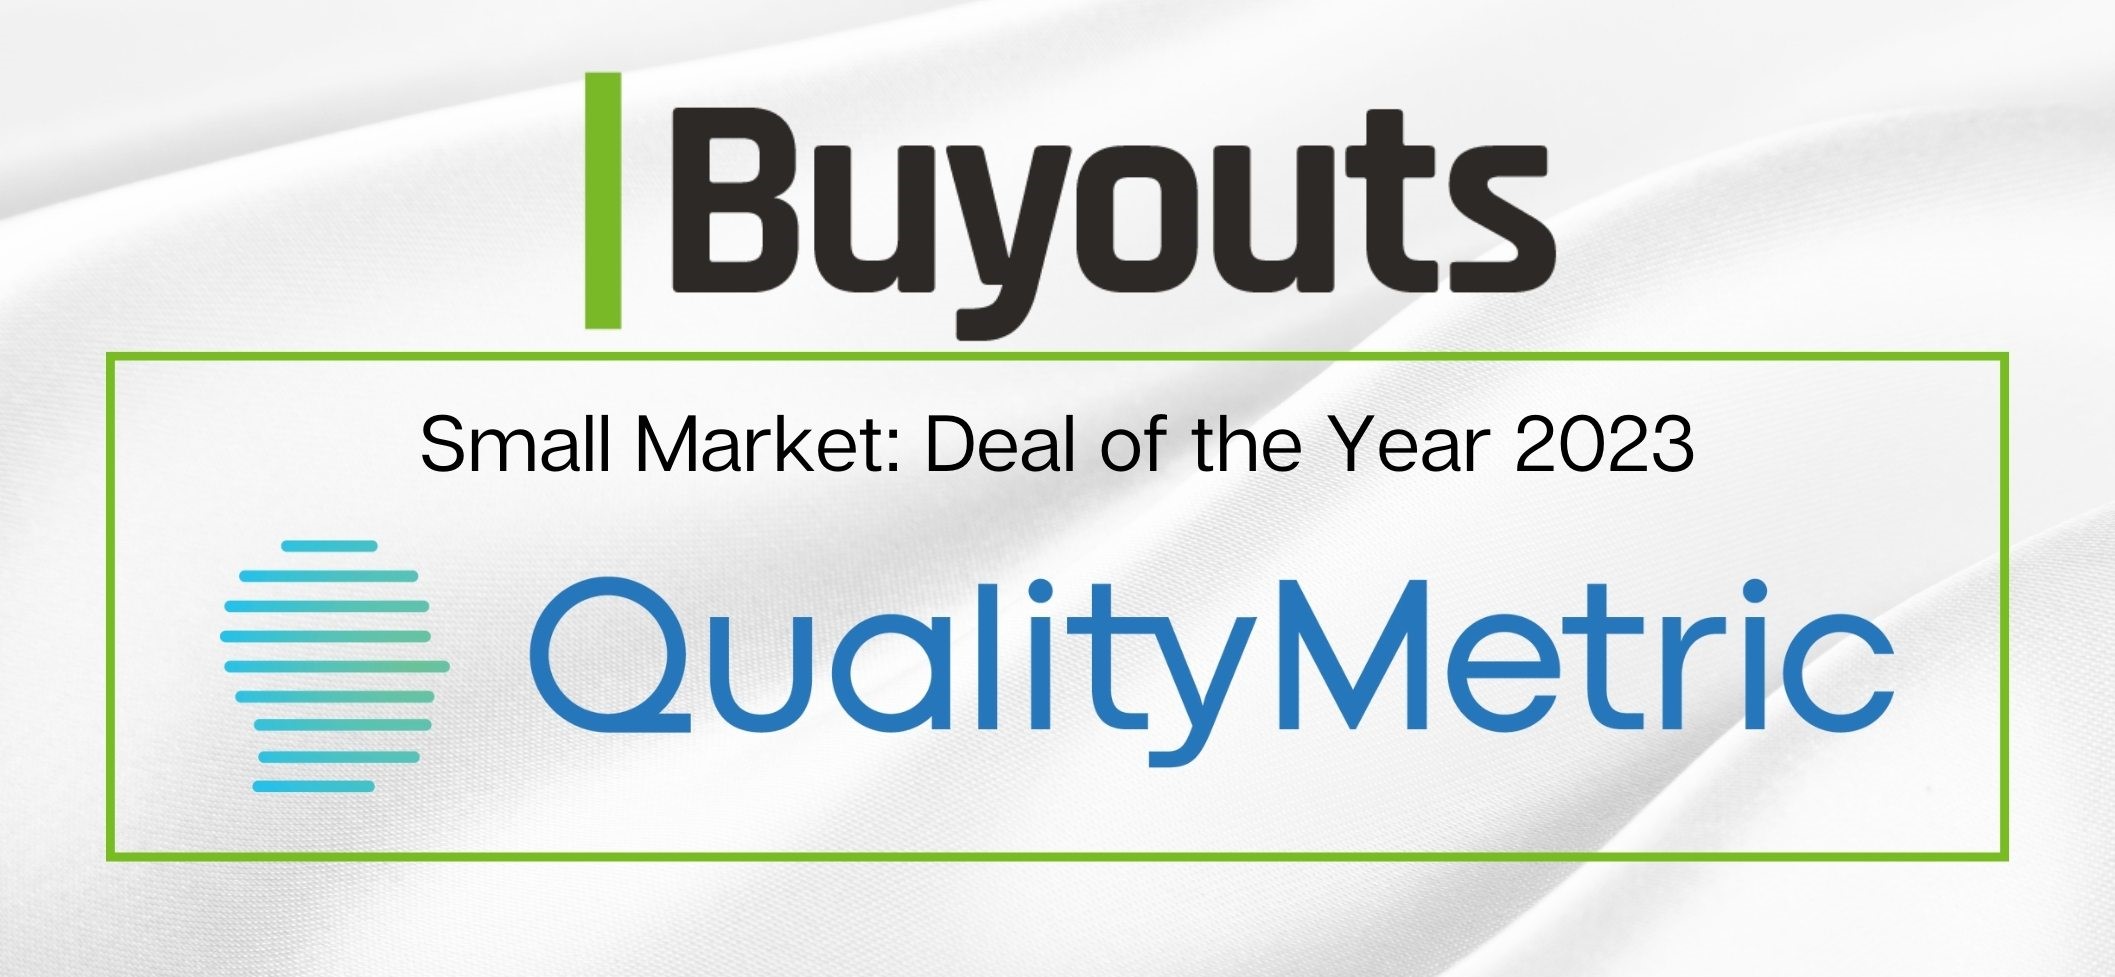 Buyouts "Deal of the Year 2023" Small Market Deal Awarded to QualityMetric